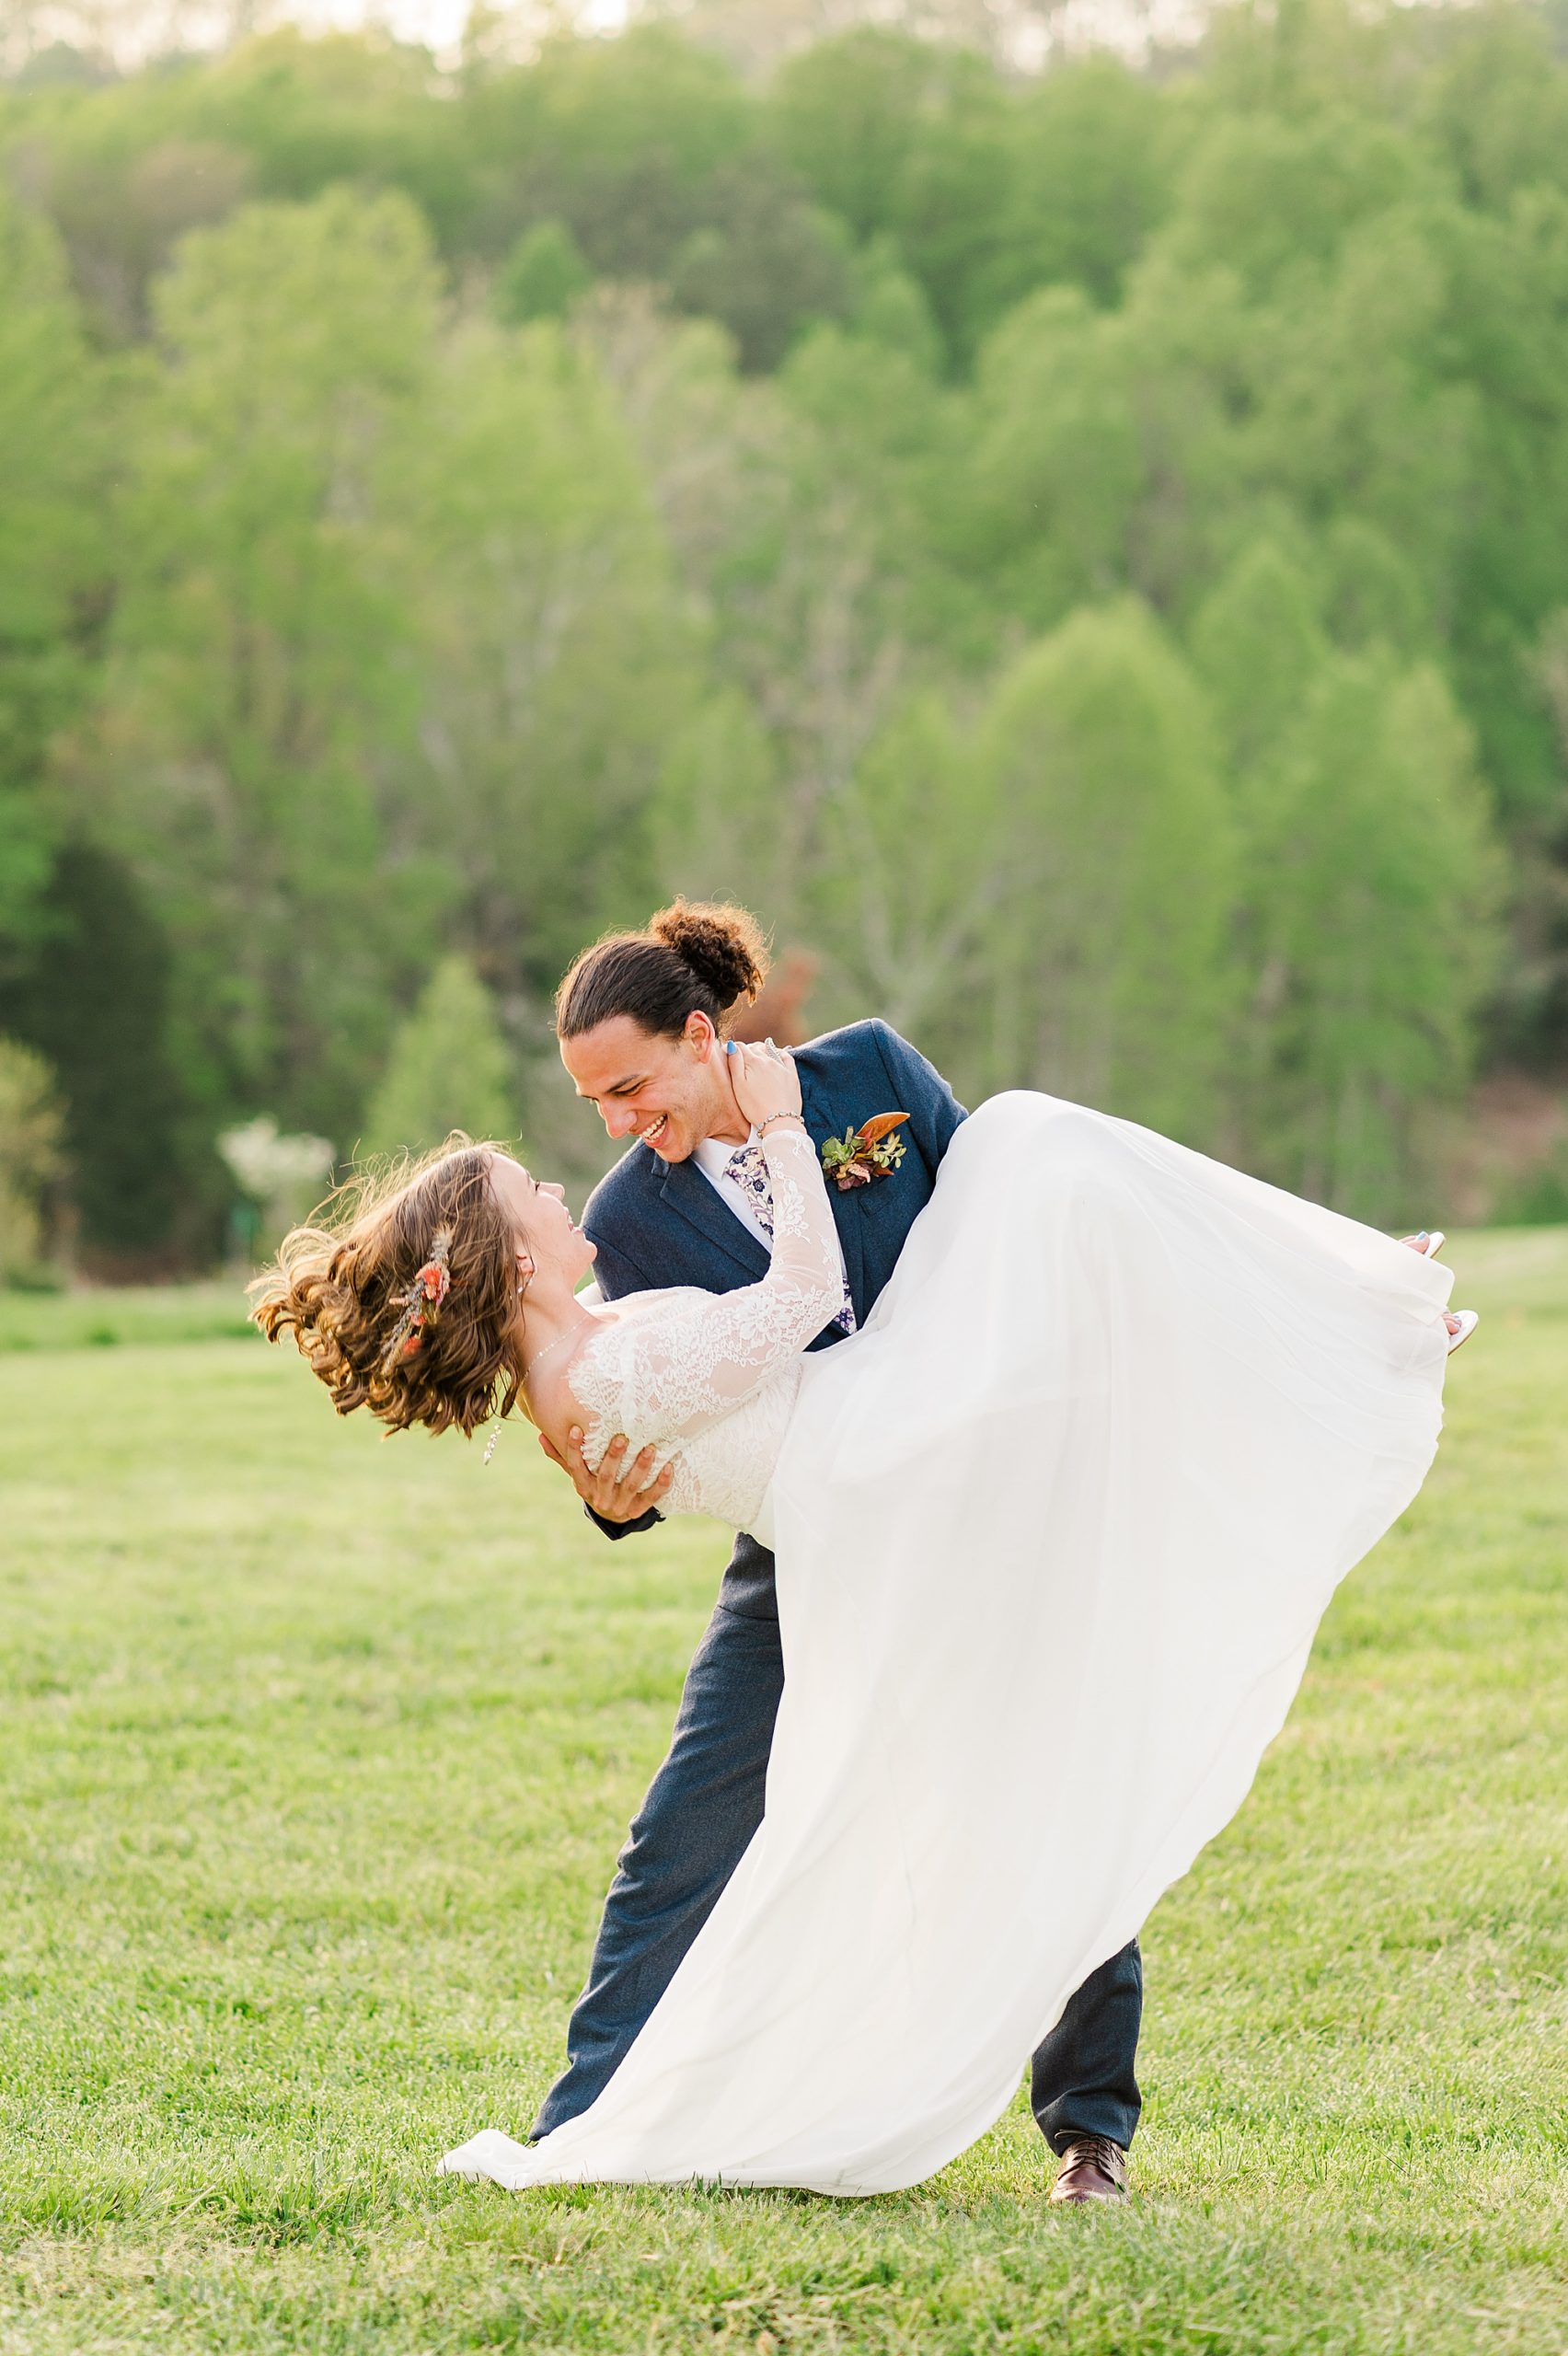 Fun Bride and Groom Portraits with Fun Virginia Wedding Photographer Kailey Brianne Photography